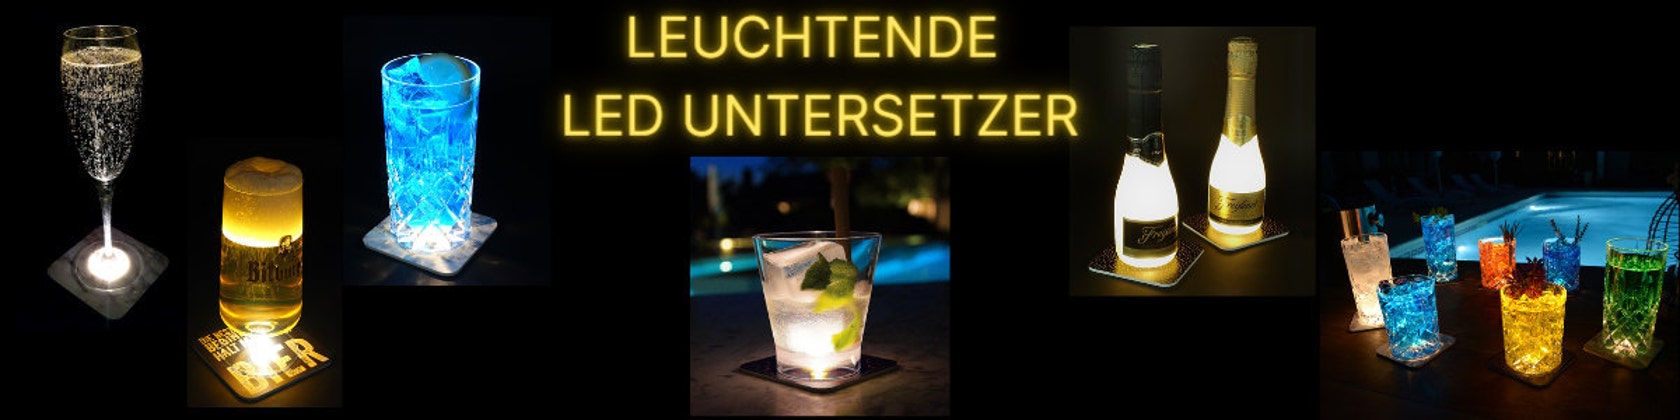 INTERLUXE leuchtender LED Untersetzer You are the gin to my tonic